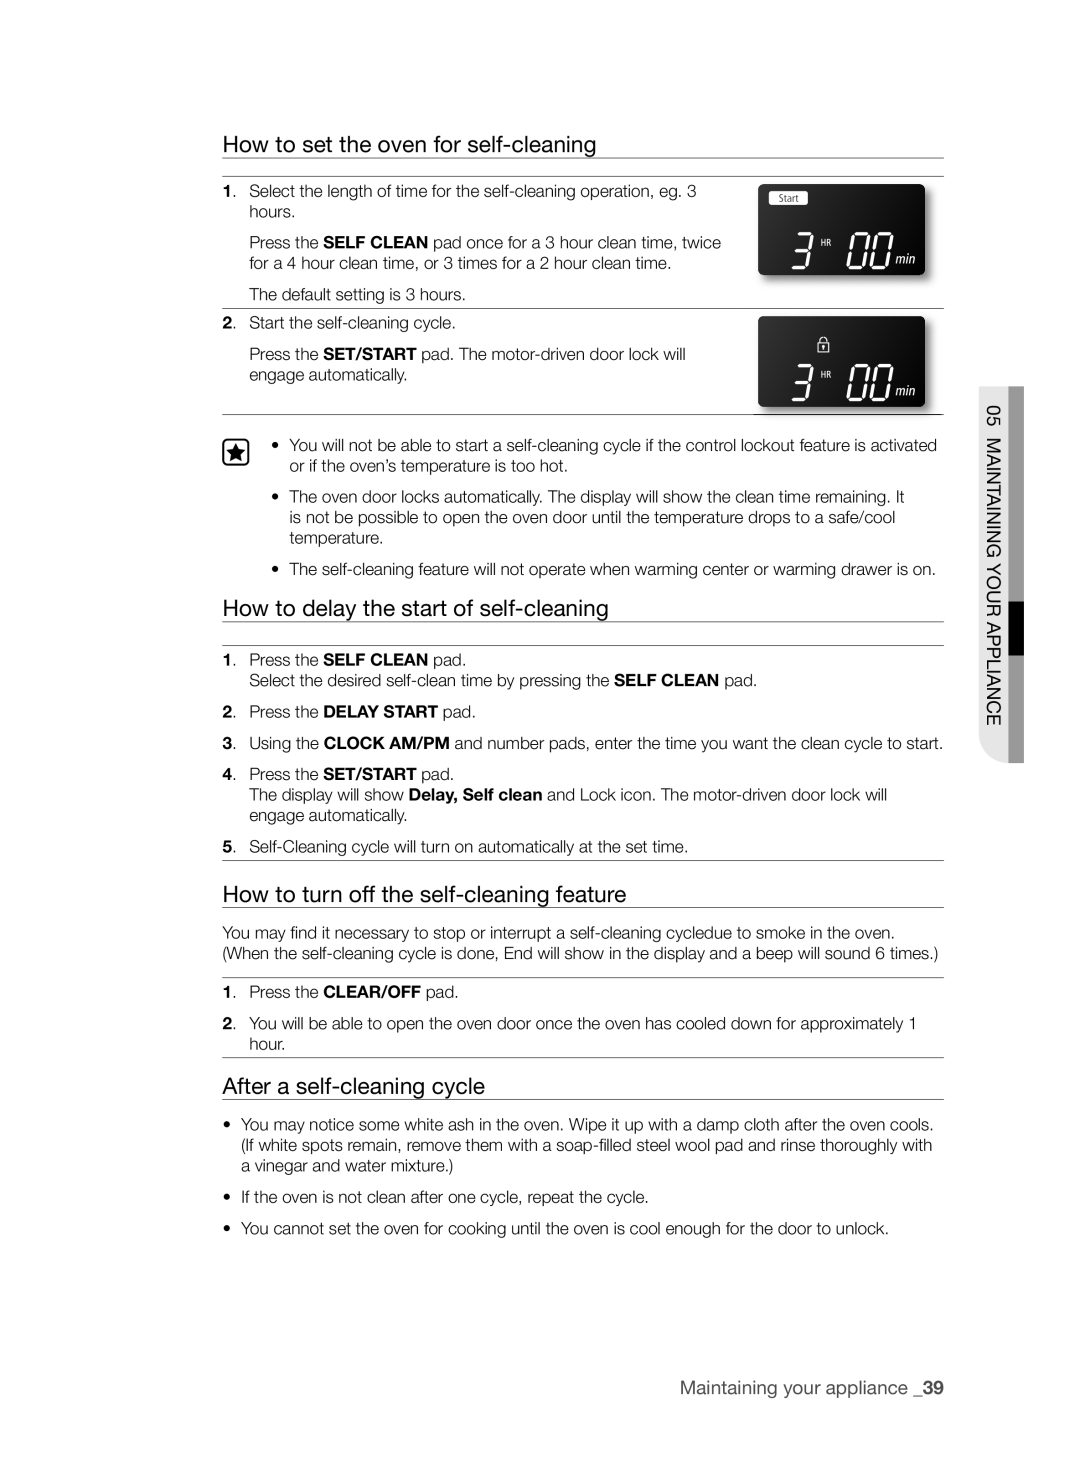 Samsung FTQ353 How to set the oven for self-cleaning, How to delay the start of self-cleaning, After a self-cleaning cycle 